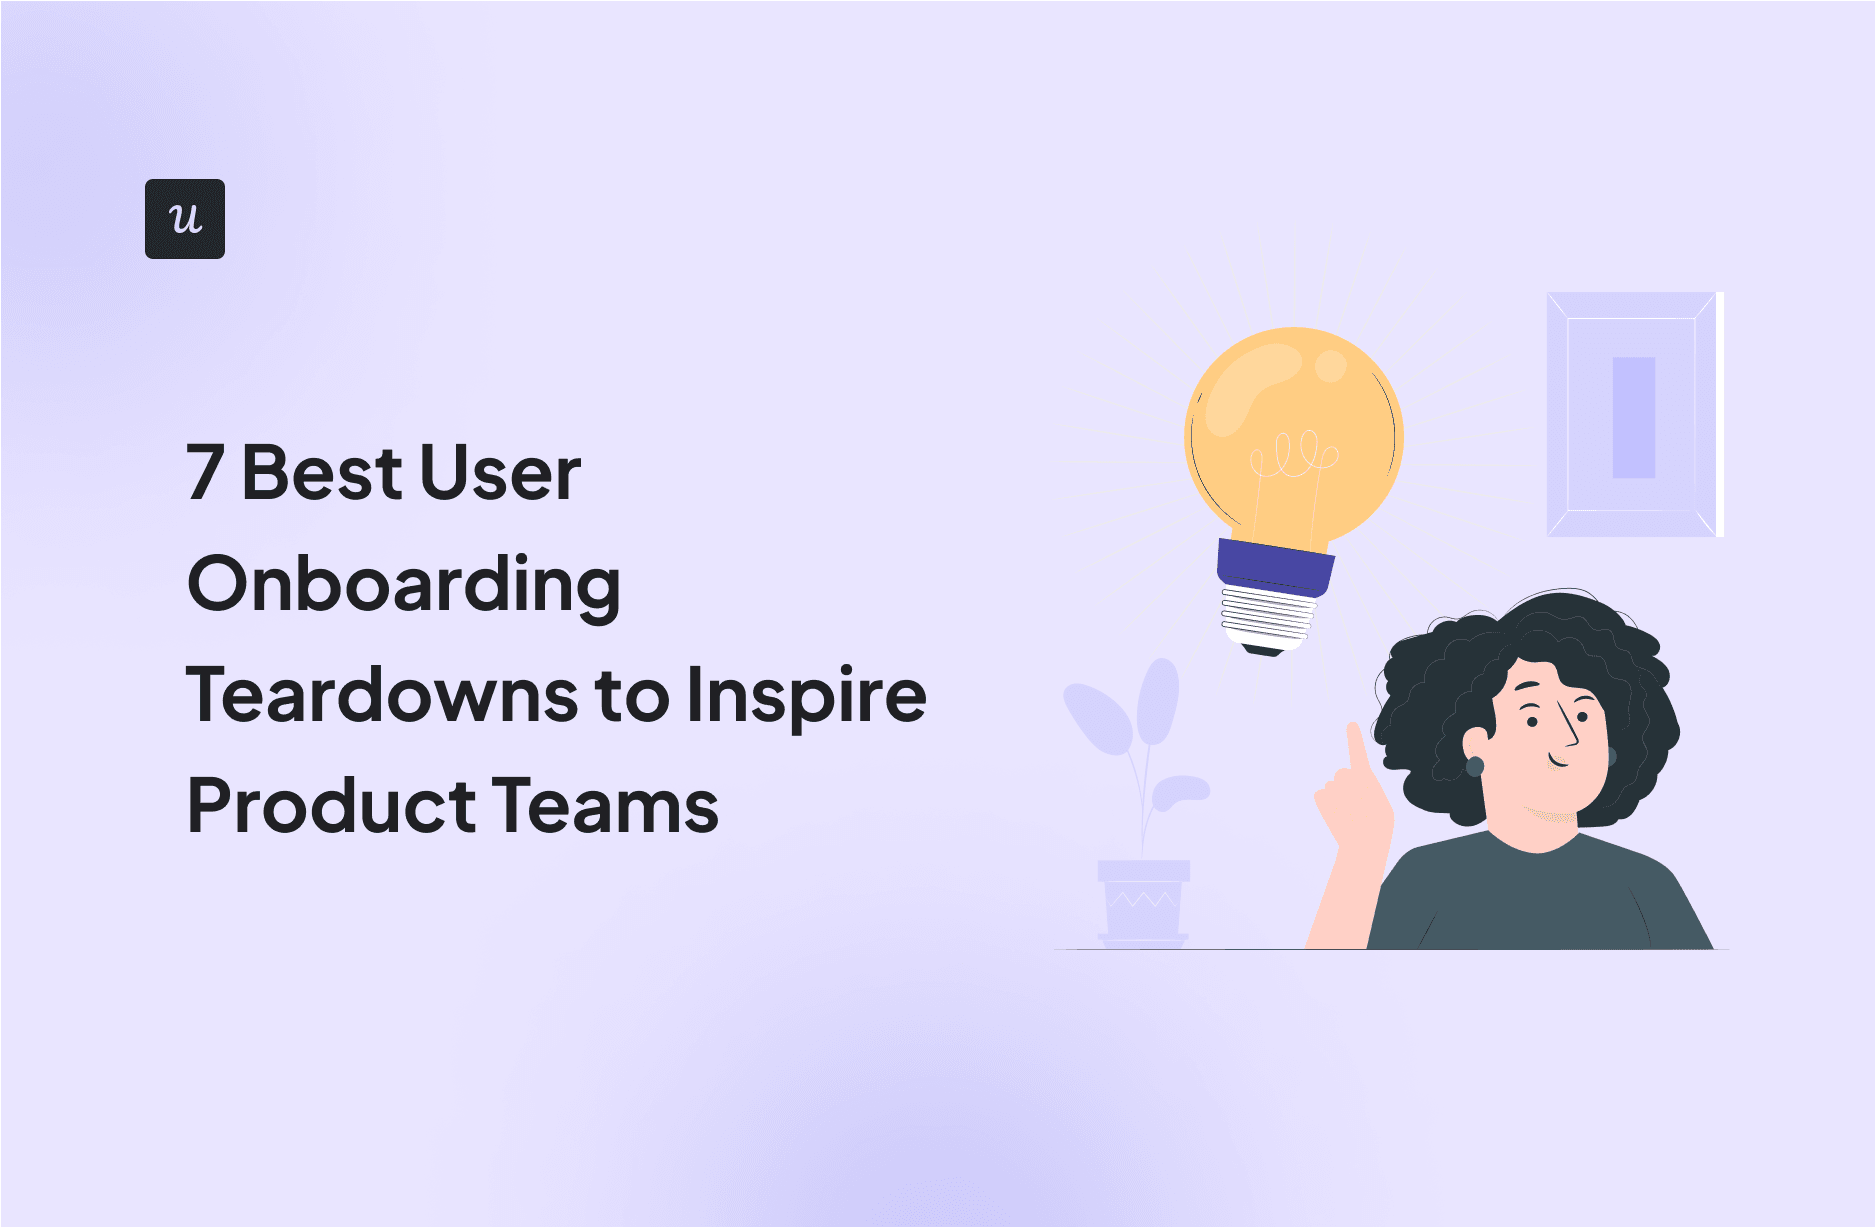 7 Best User Onboarding Teardowns to Inspire Product Teams cover